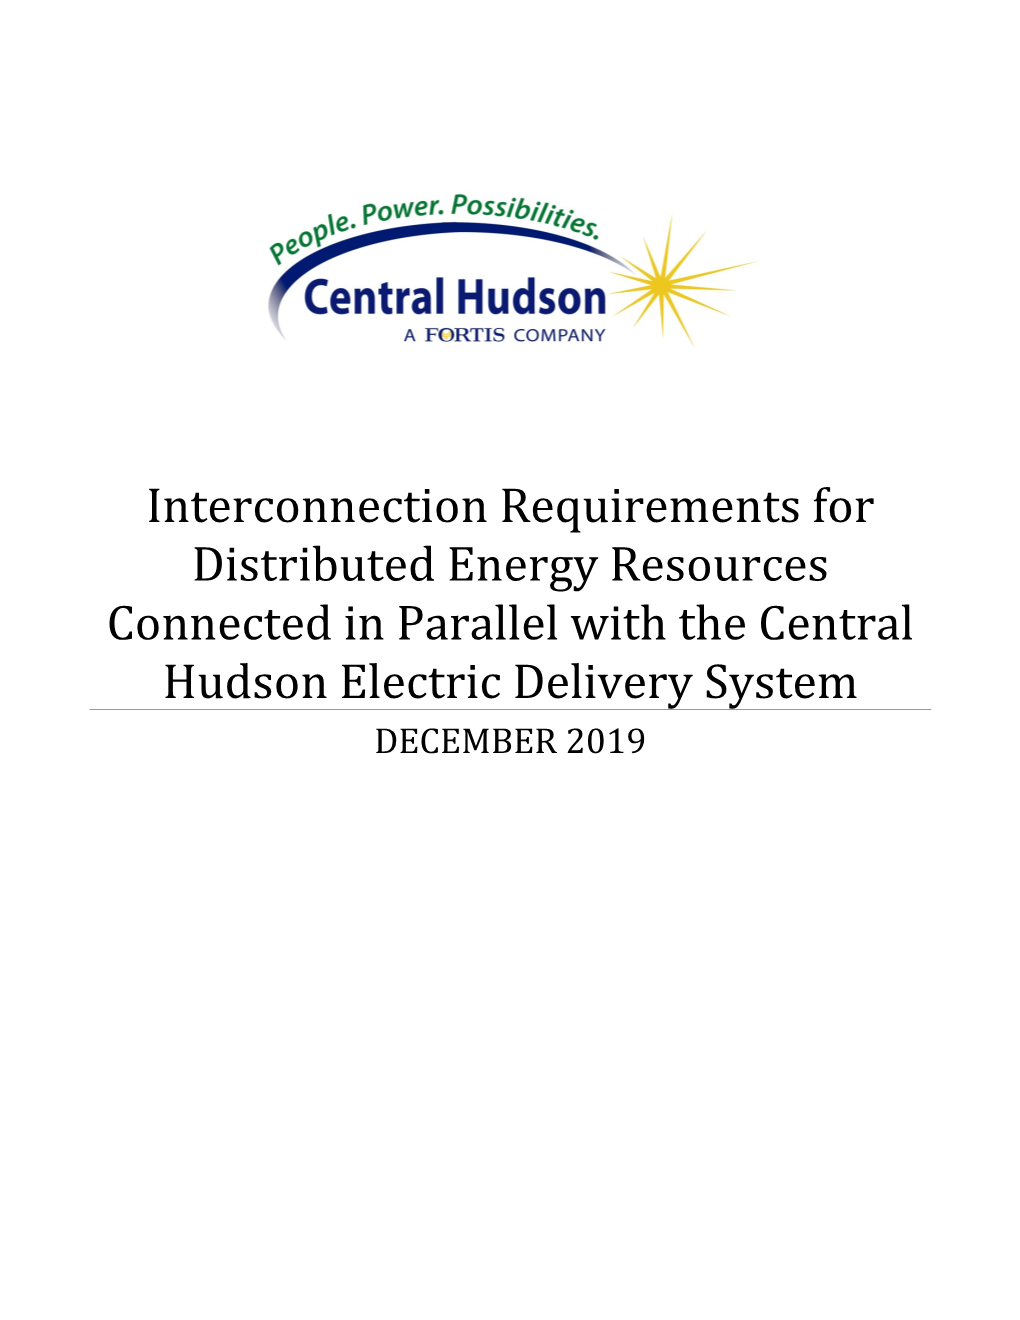 Interconnection Requirements for Distributed Energy Resources Connected in Parallel with the Central Hudson Electric Delivery System DECEMBER 2019